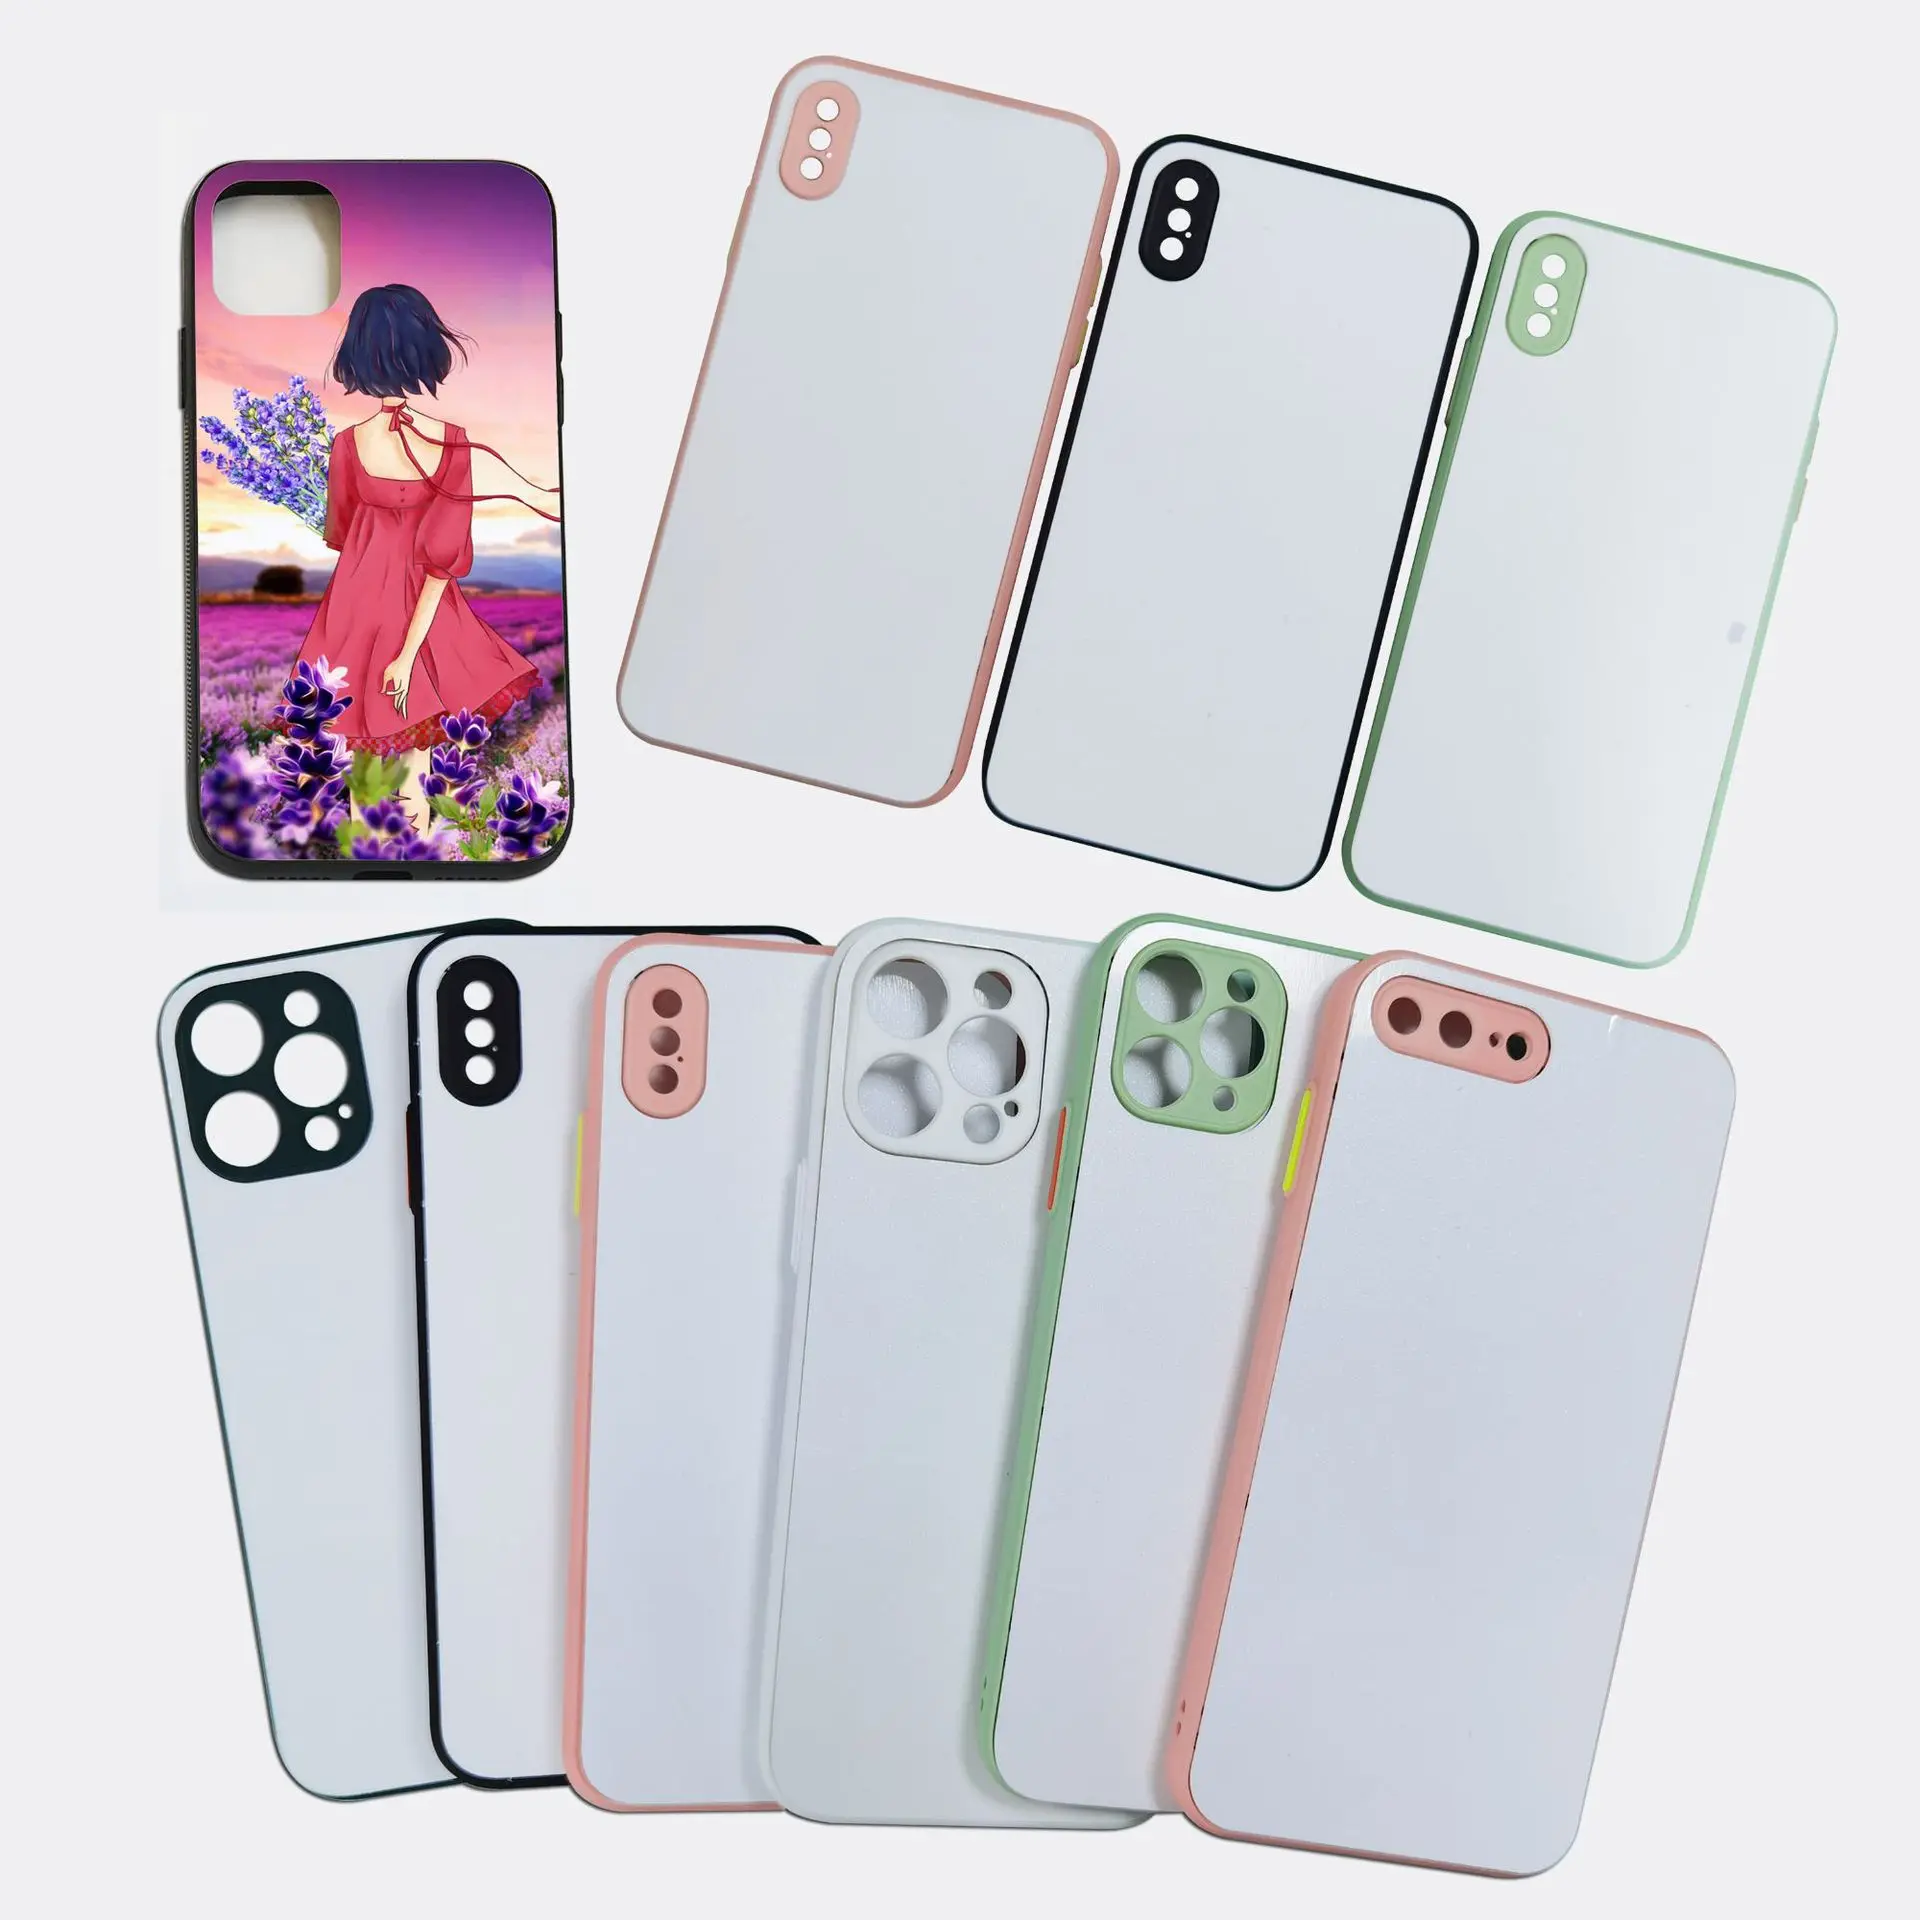 

High Quality Sublimation Phone Case 2d Blank thermal transfer phone case for iphone 12 mini pro max 11 pro max xs max, The custom